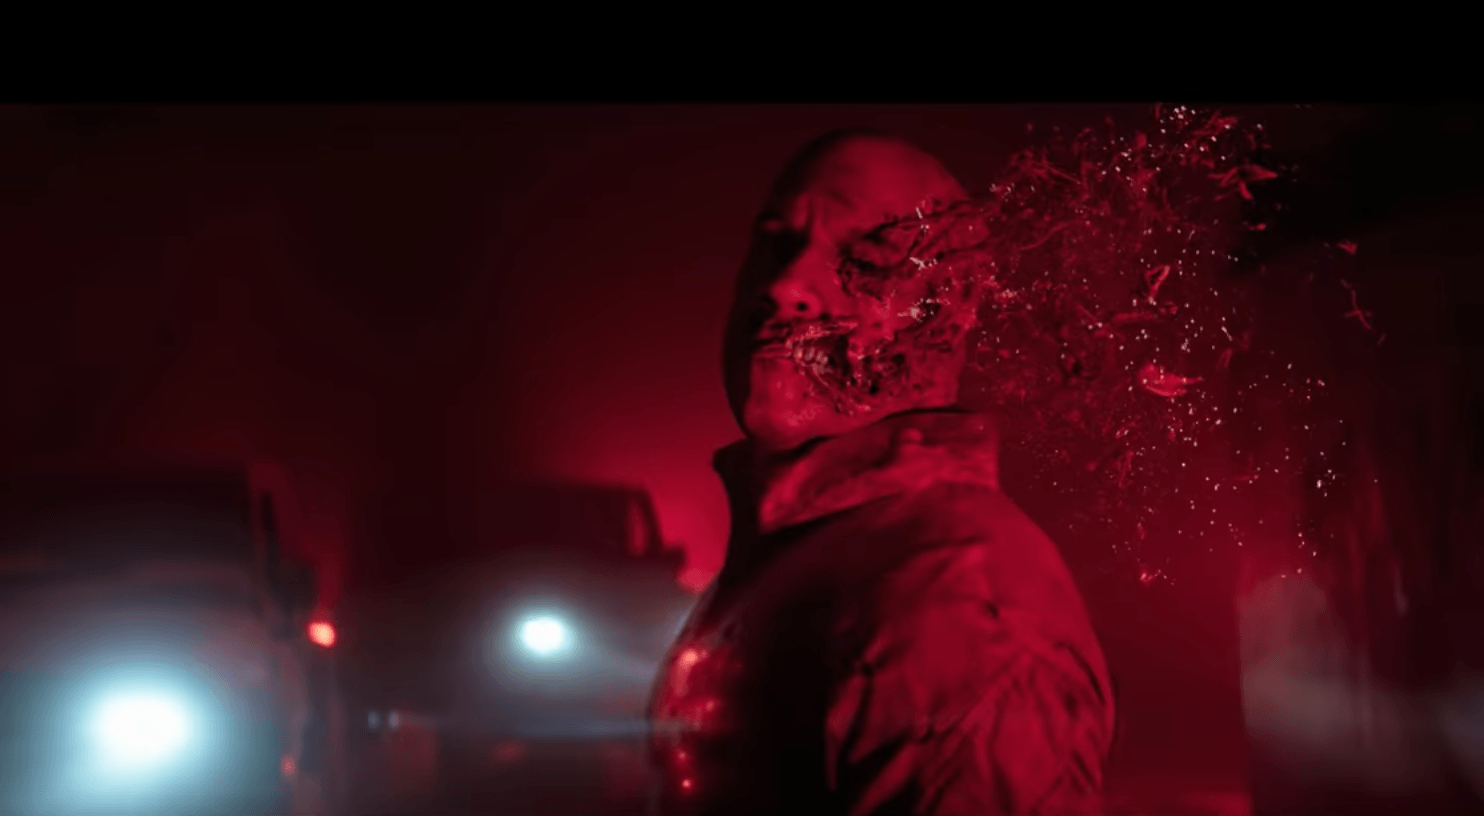 Watch Vin Diesel Come Back to Life in 'Bloodshot'